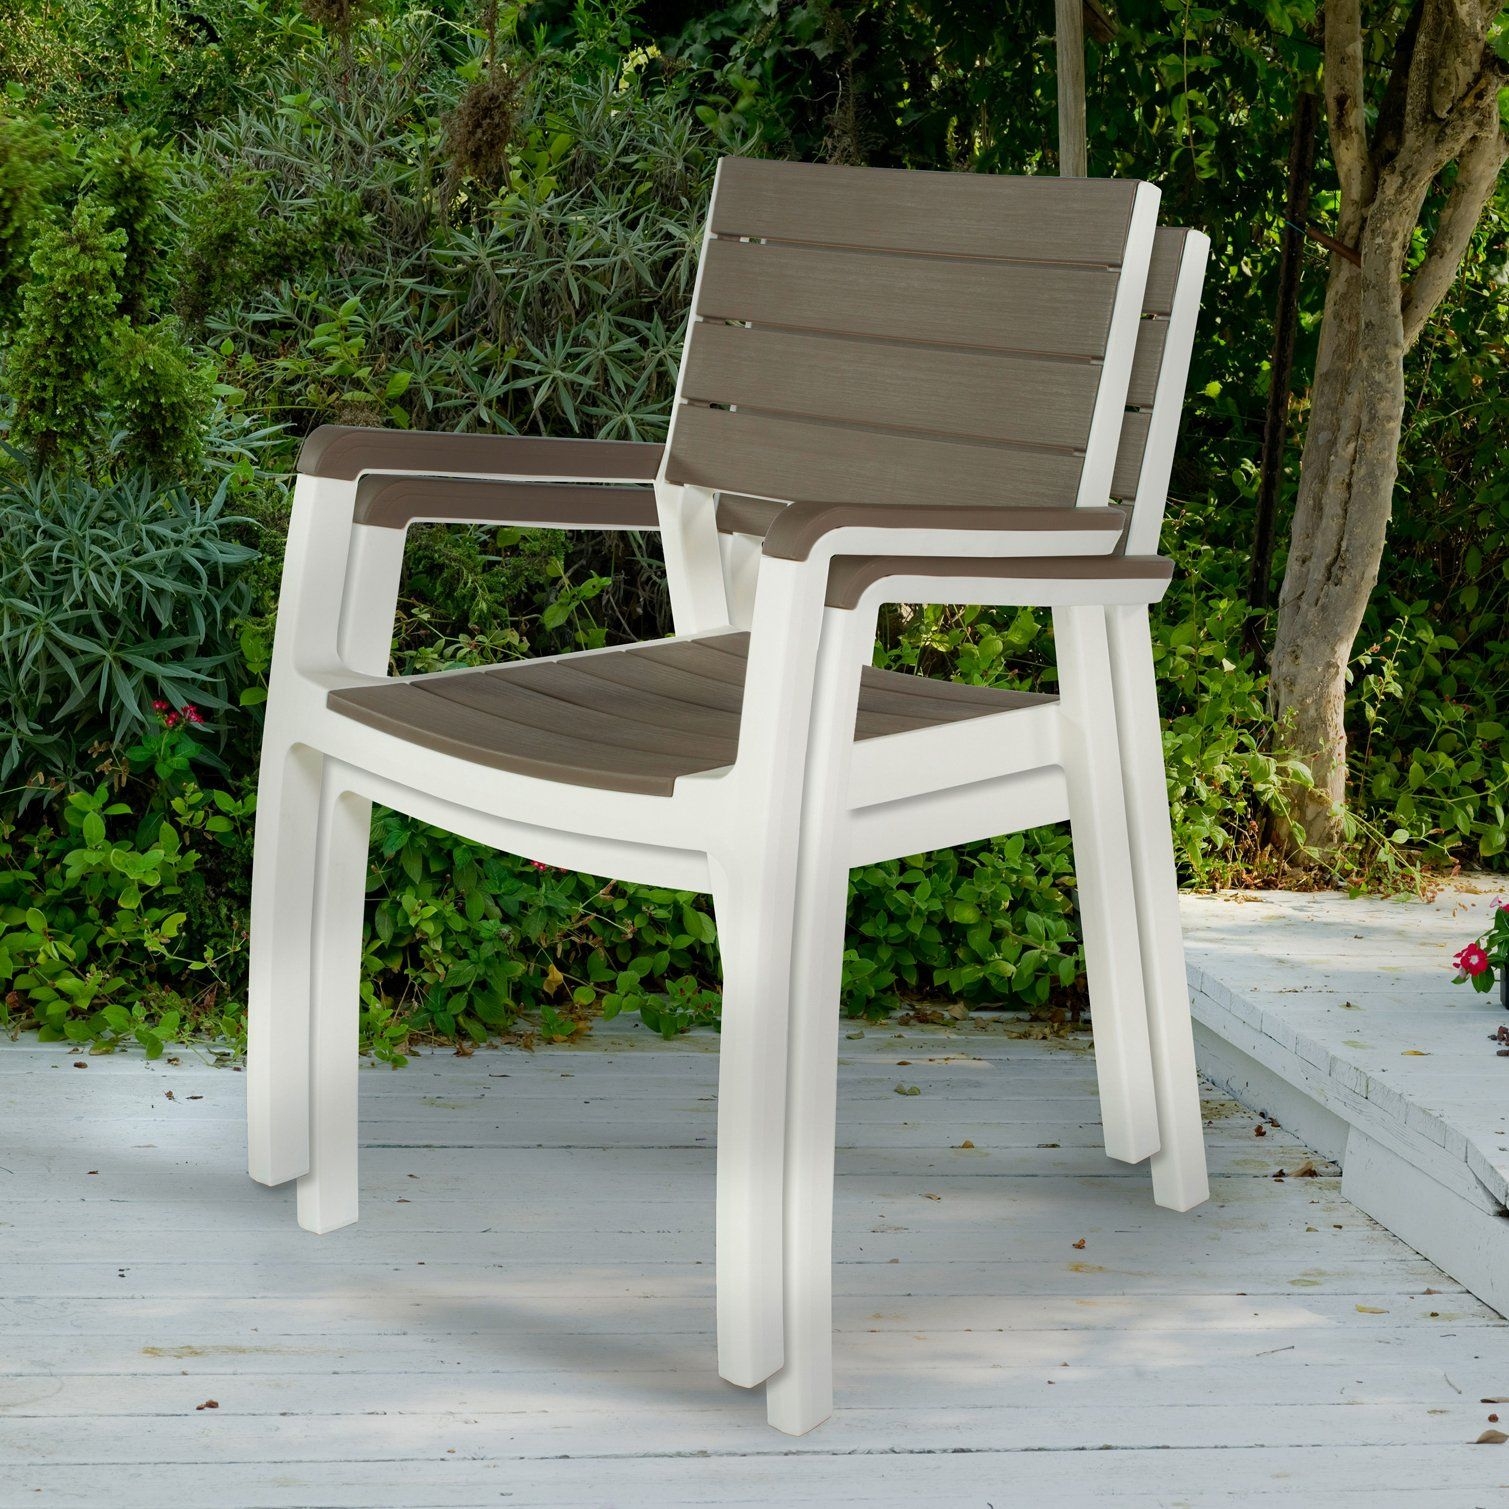 Plastic Patio Chairs Visualhunt, Plastic Stackable Outdoor Chairs With Arms